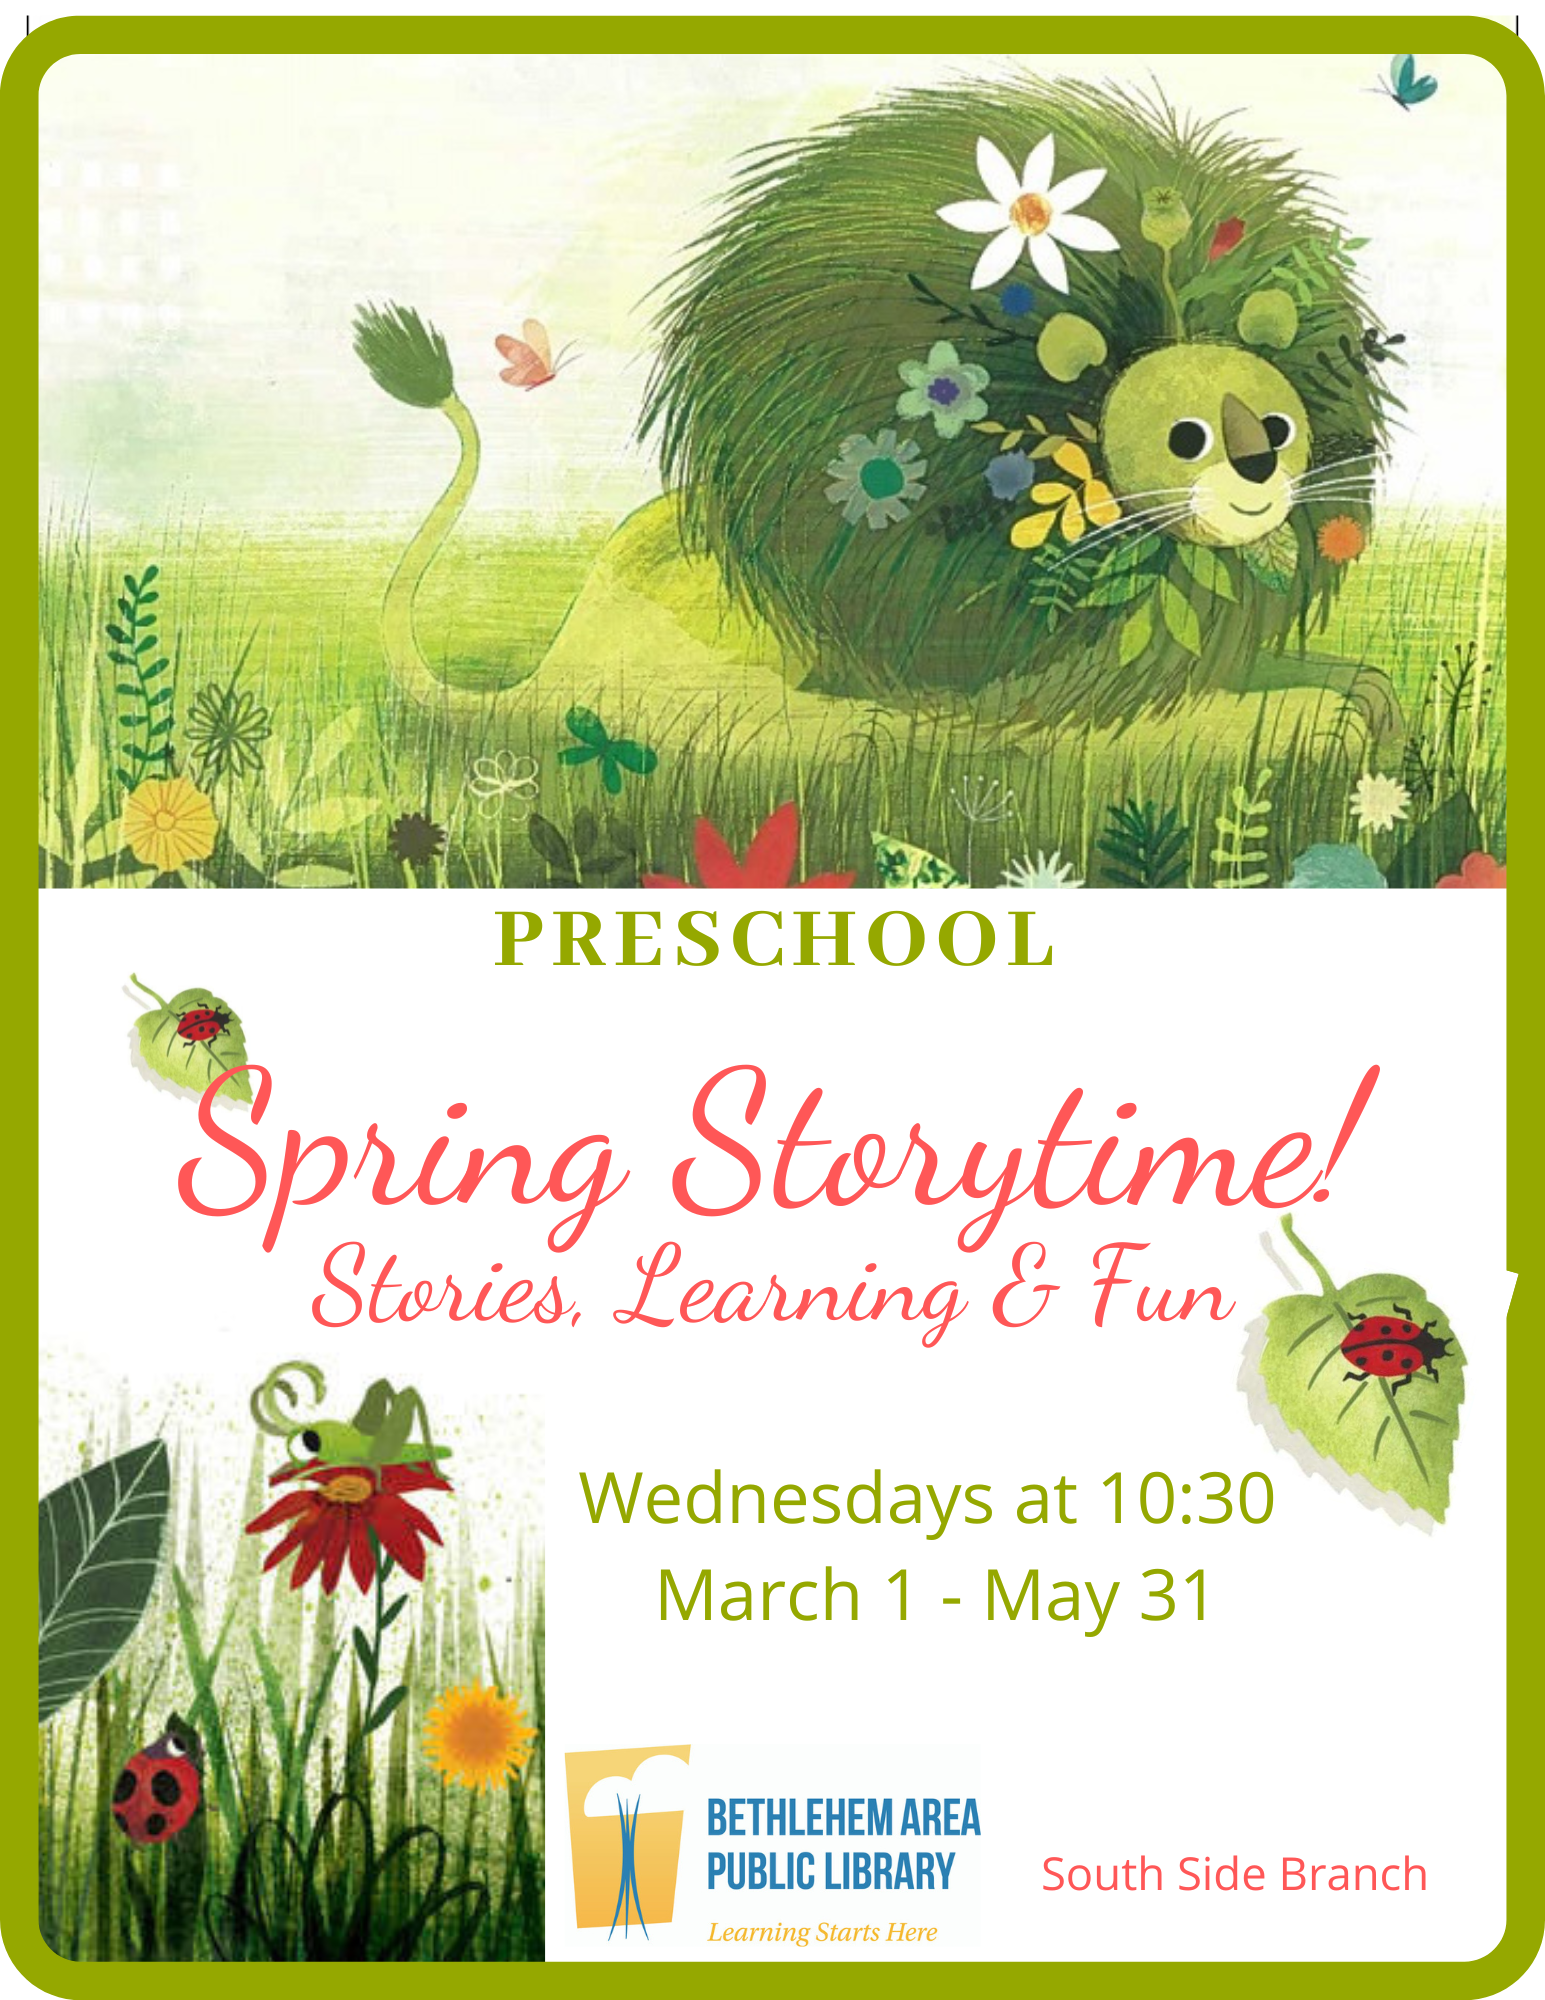 Join us for storytime!